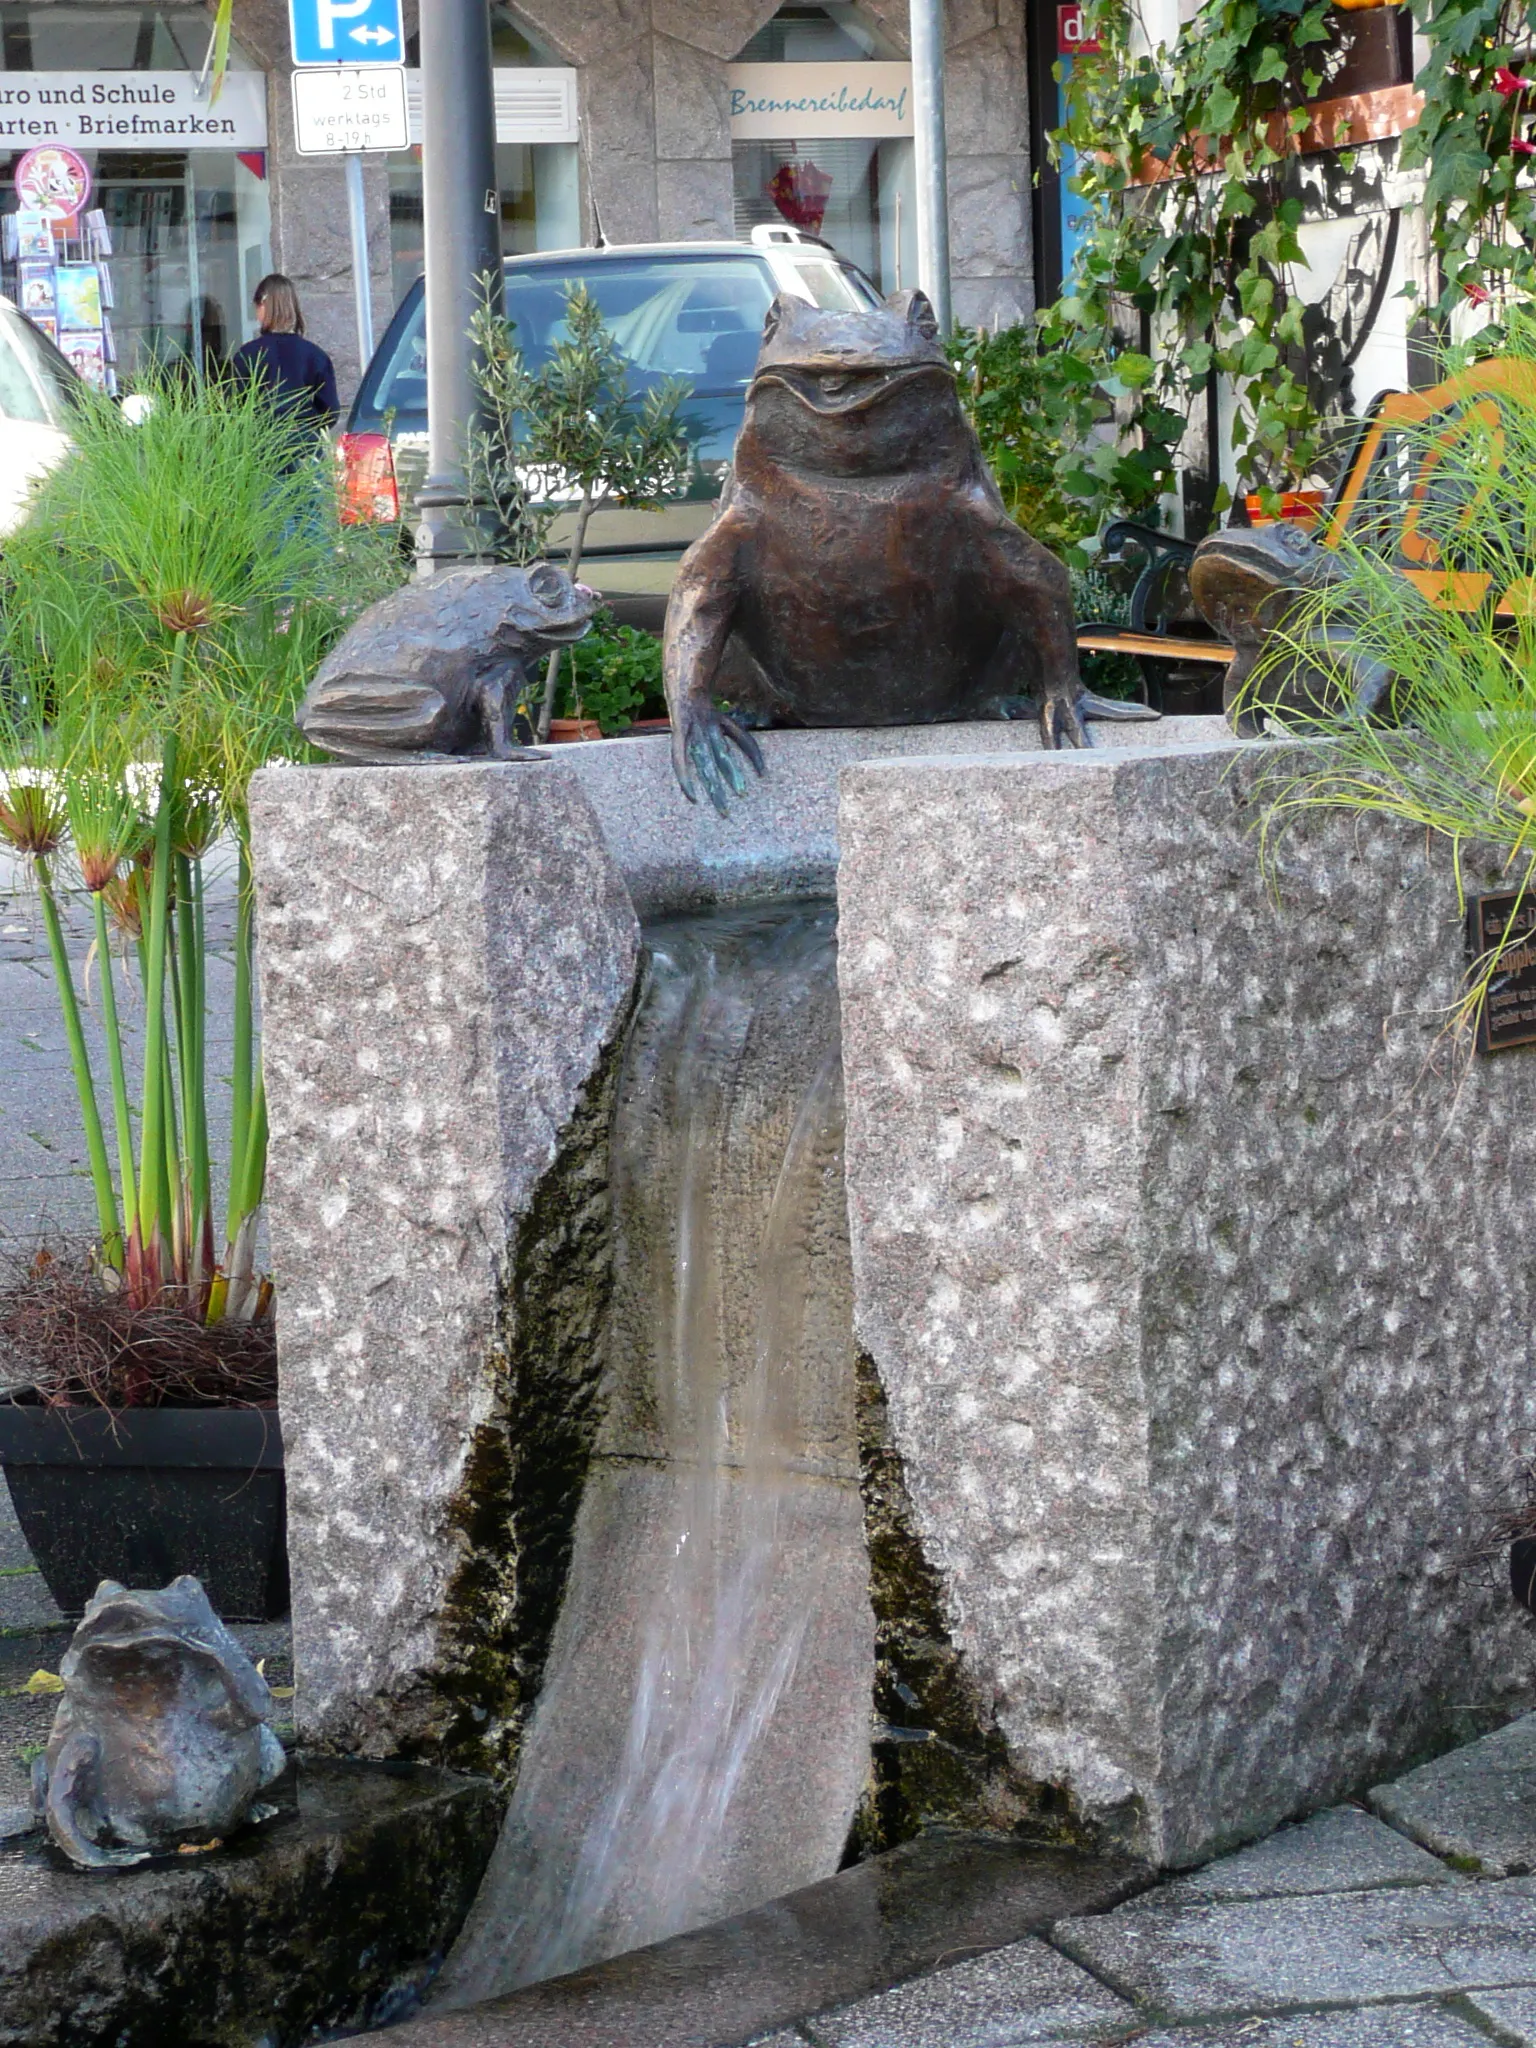 Photo showing: Fountain with frogs in Kappelrodeck, Ortenaukreis.